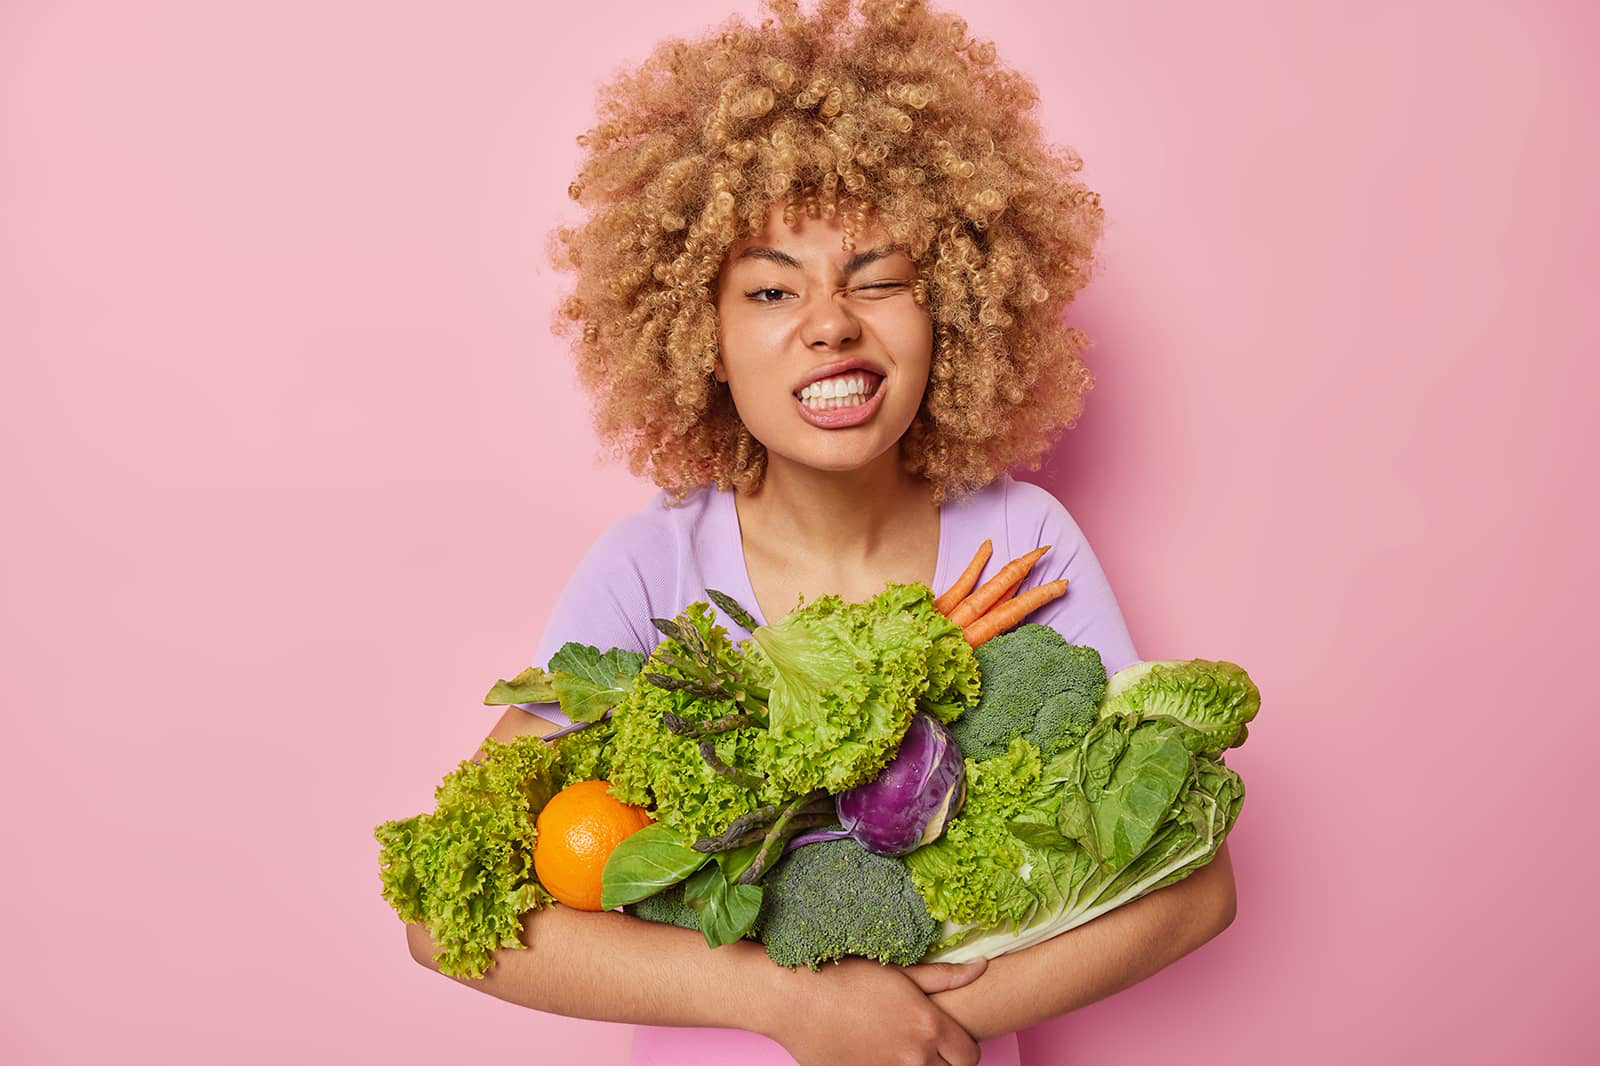 Featured Image for the Chew and Lush article "Vegan vs Plant-Based"